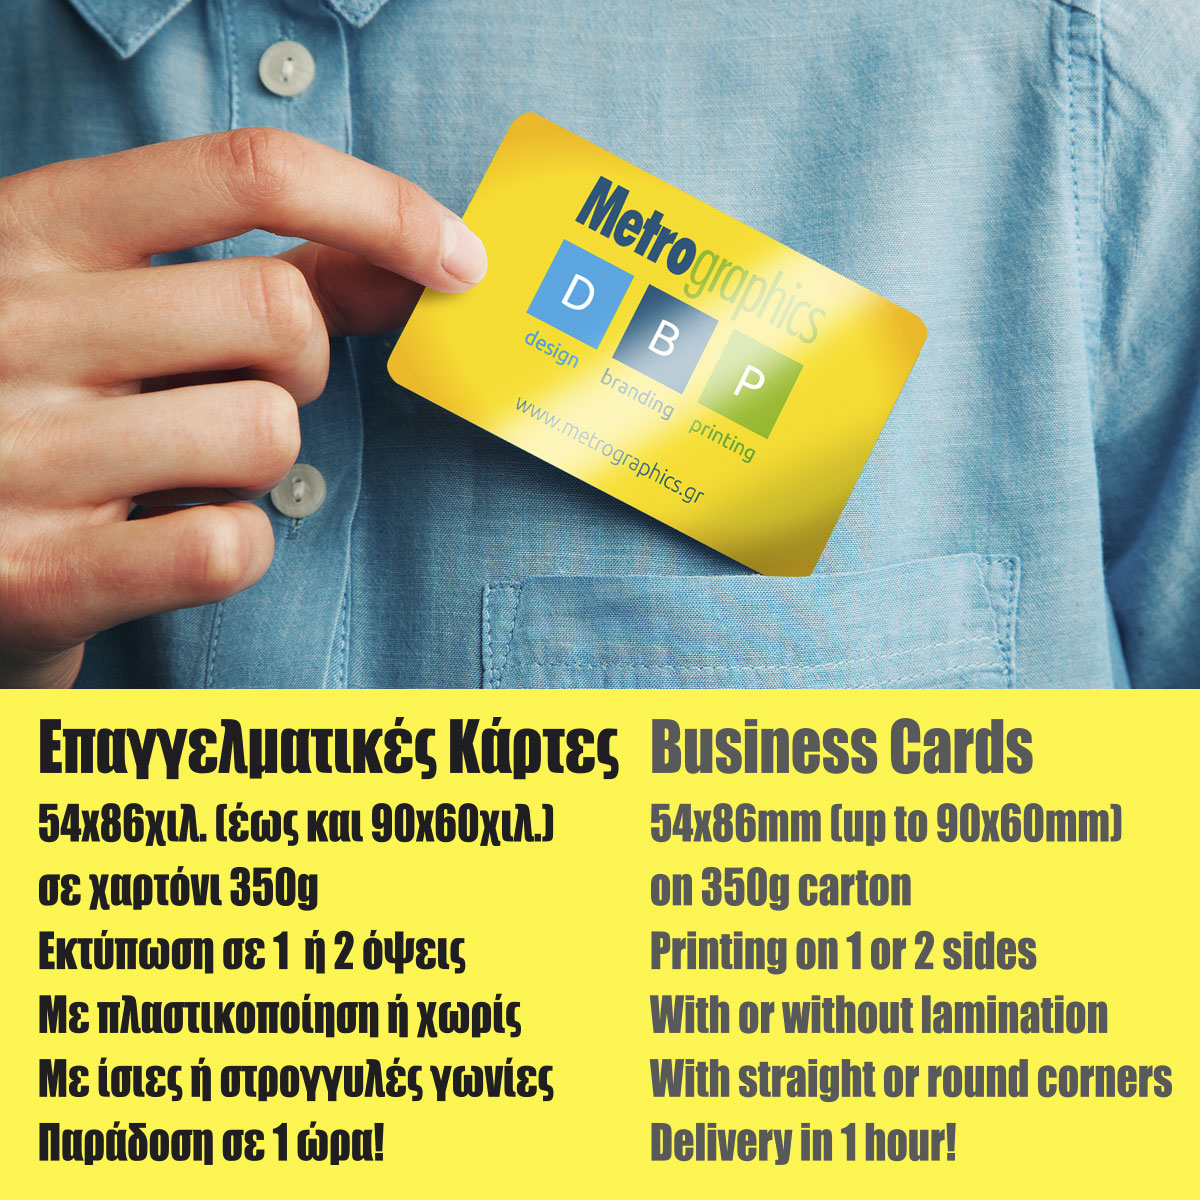 Business Cards 54x86mm (up to 90x60mm) on 350g carton Printing on 1 or 2 sides With or without lamination With straight or round corners Delivery in 1 hour!